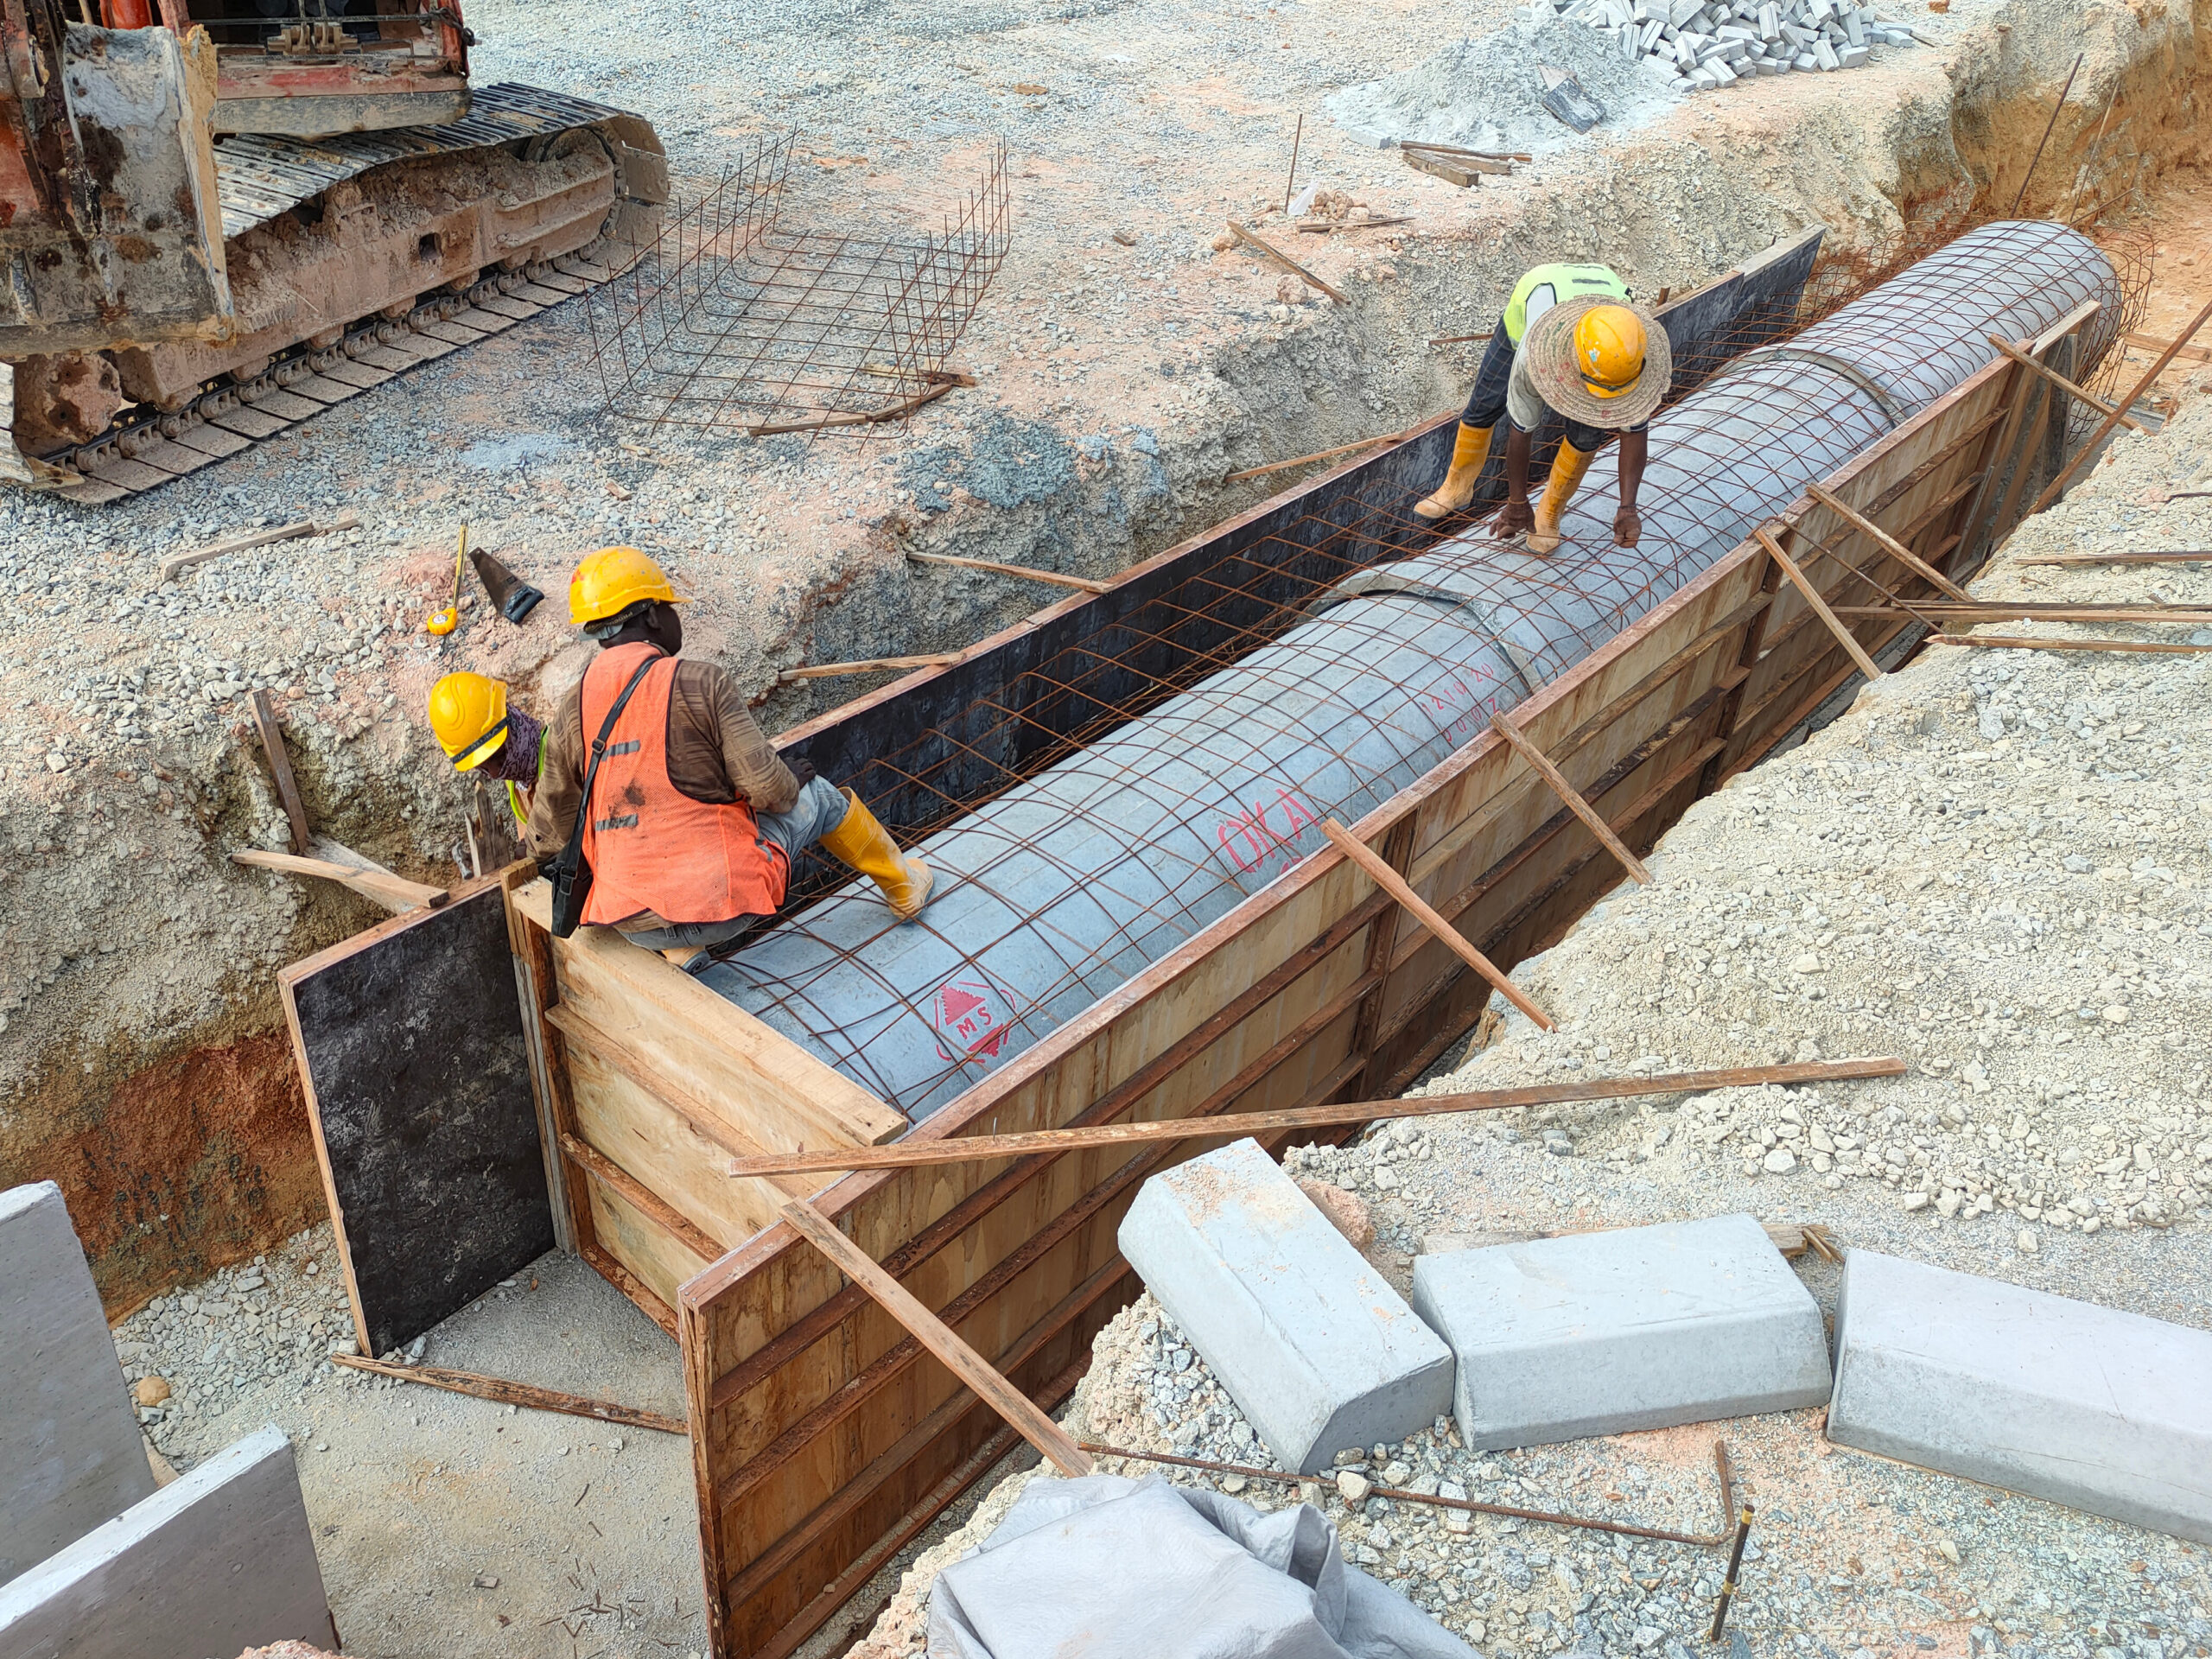 Workers constructing underground drain at the construction site. It is used to channel stormwater to prevent flash floods.